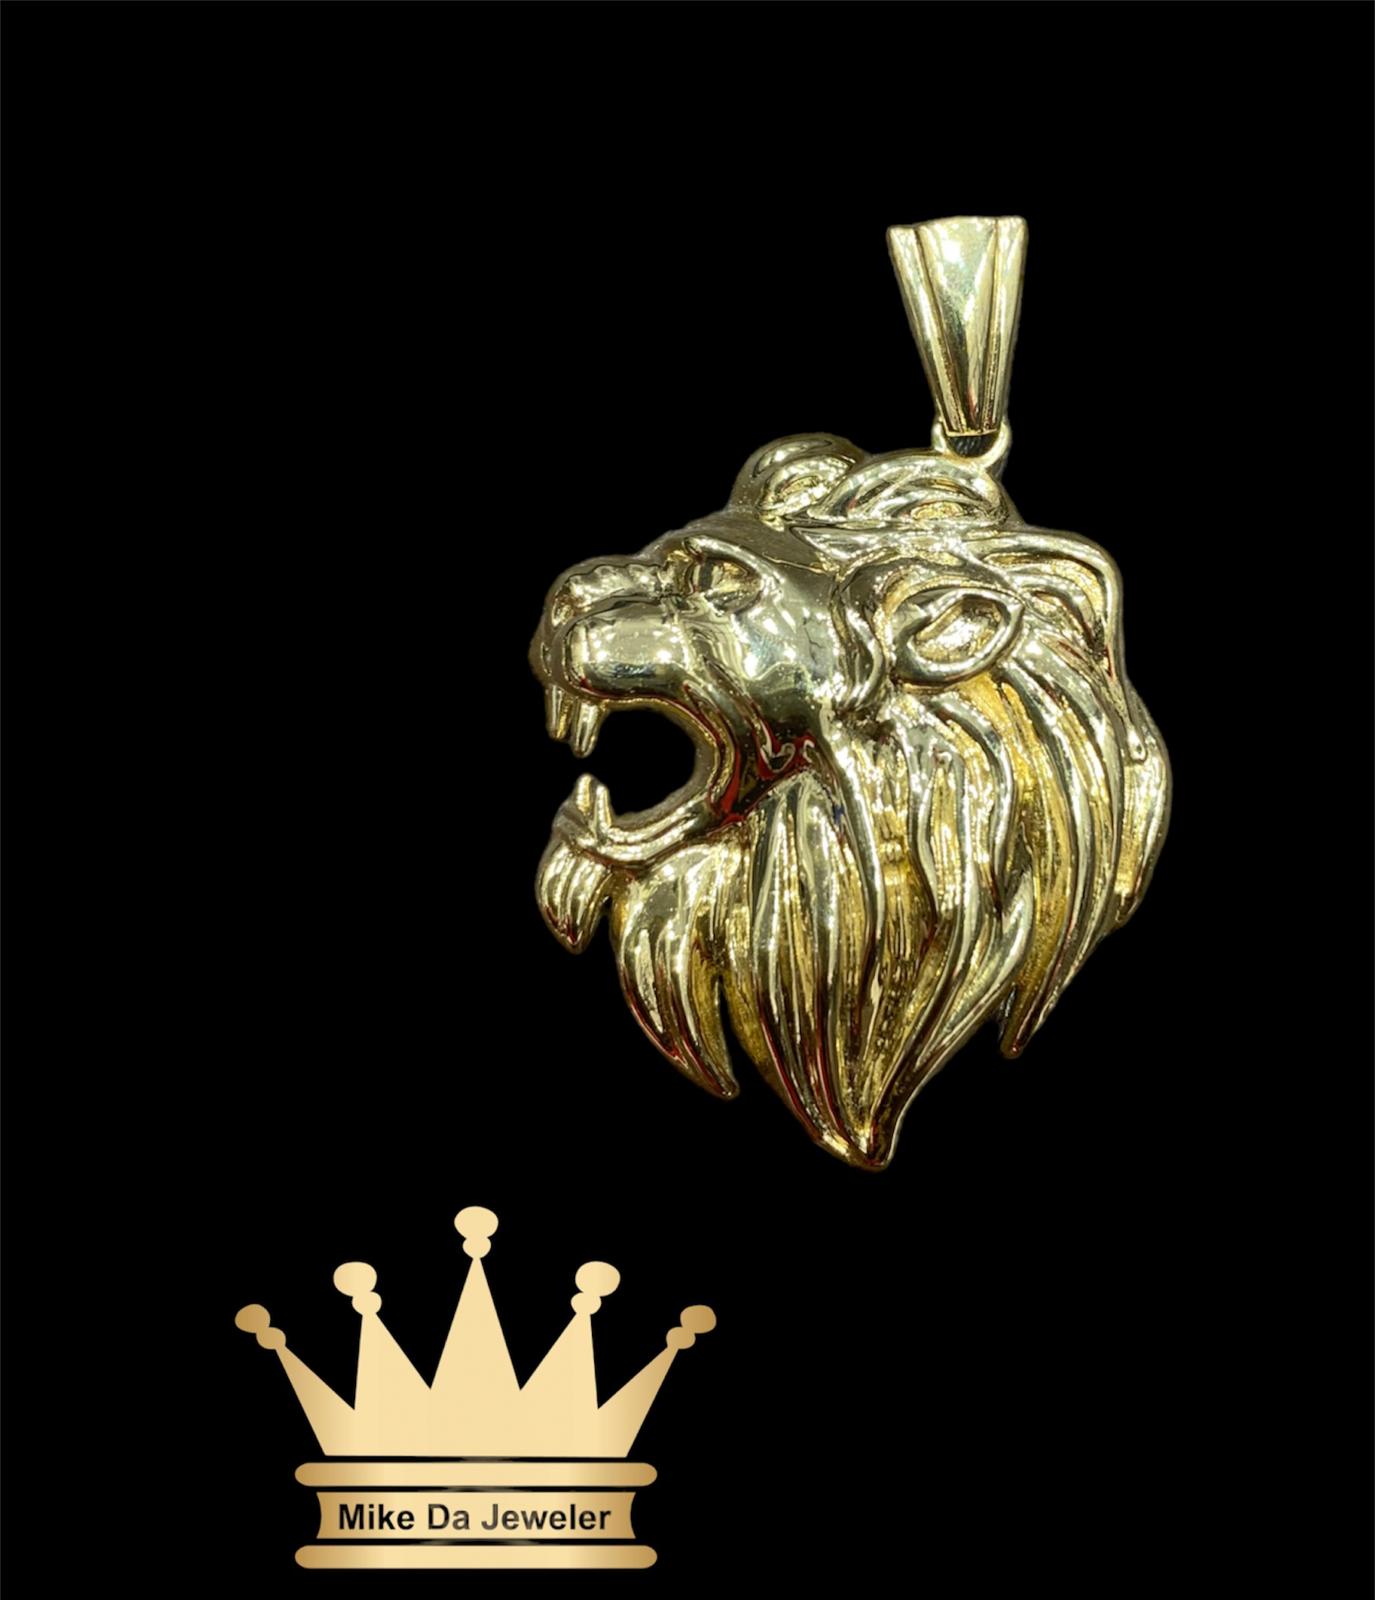 18k handmade solid lion face pendant fully polish work price $1075 dollars weight 10.17 grams 1 inches